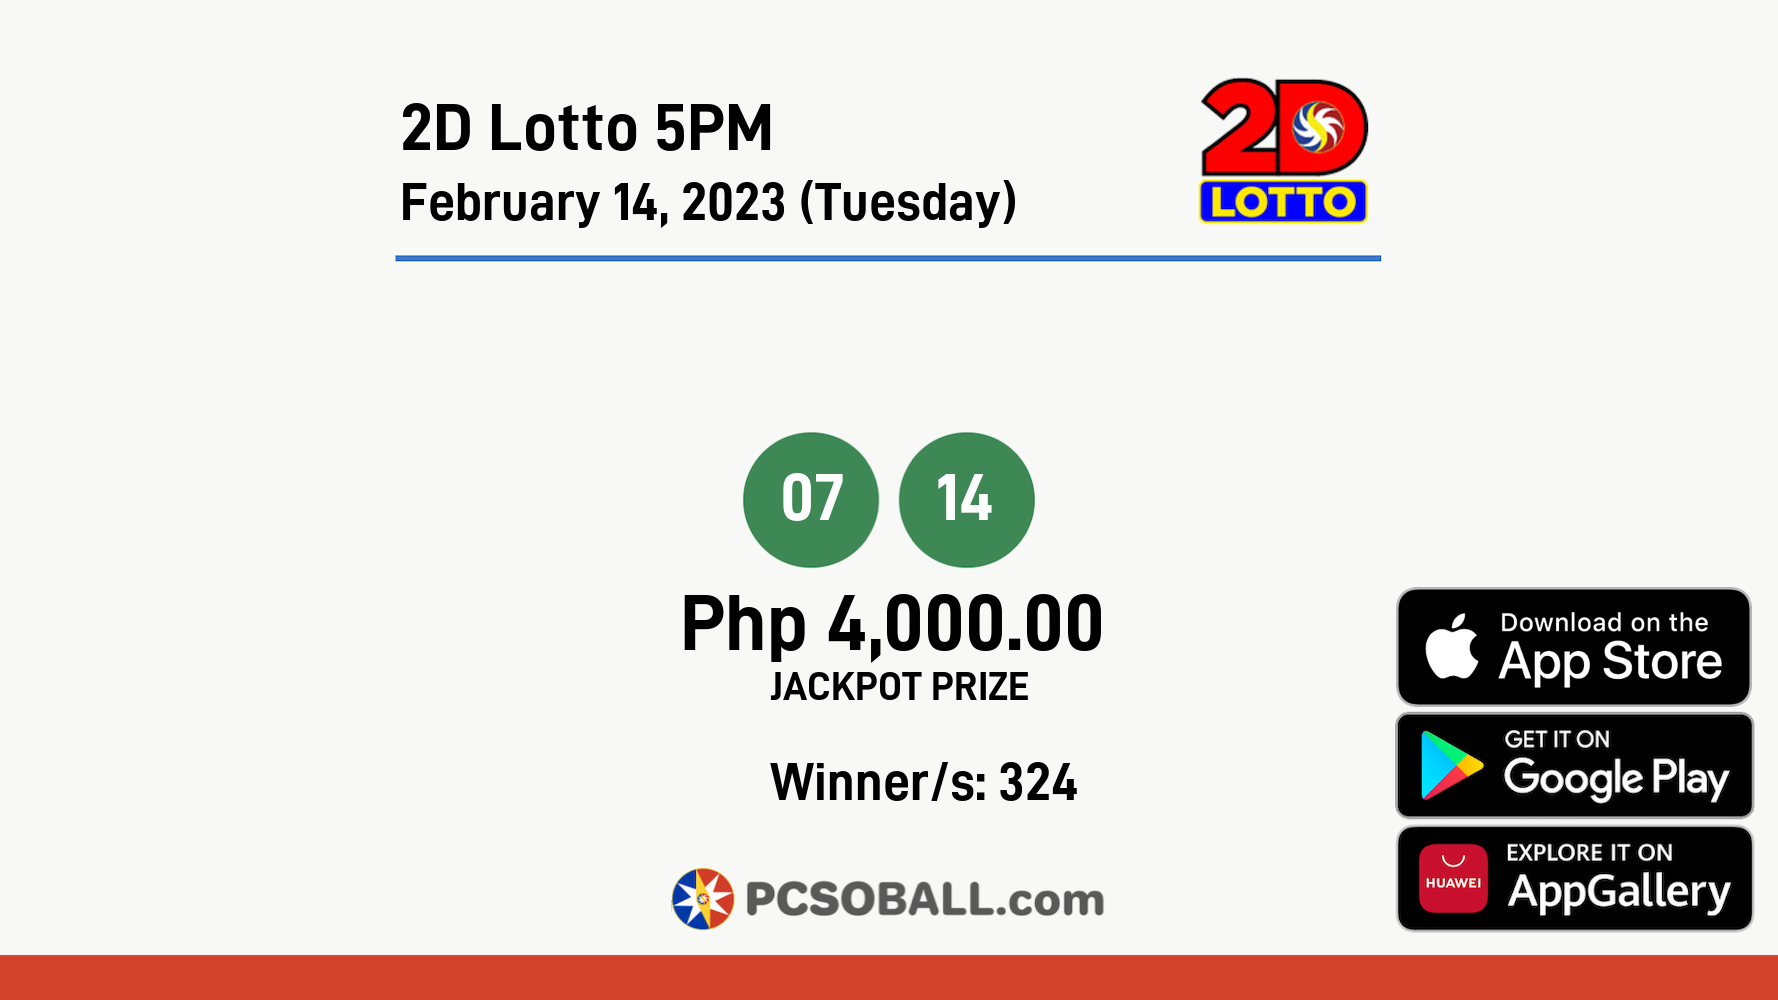 2D Lotto 5PM February 14, 2023 (Tuesday) Result